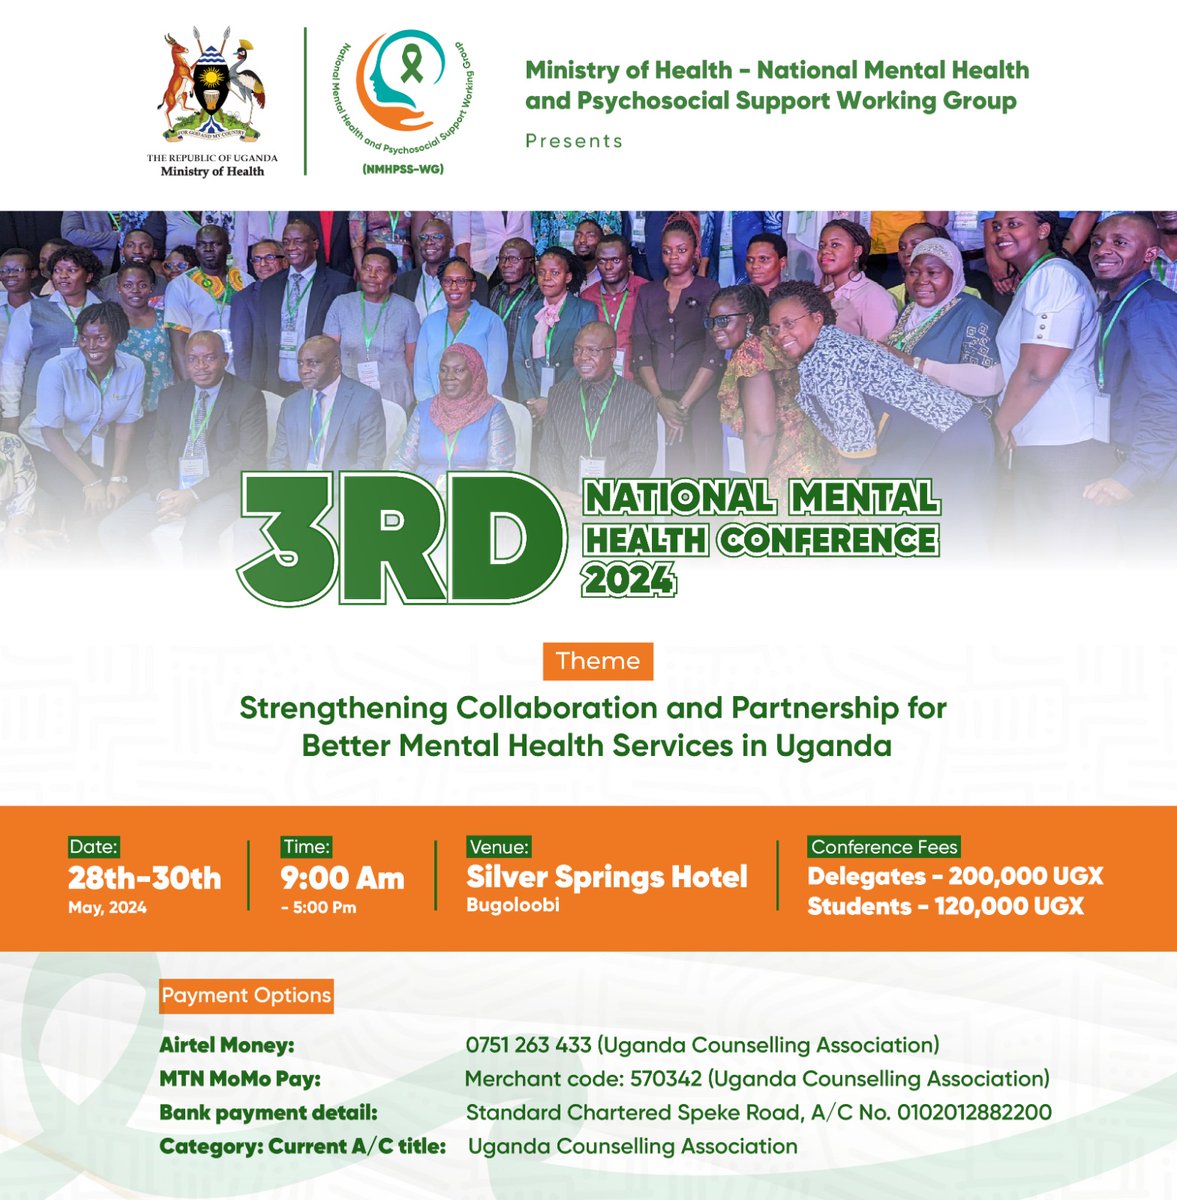 May is a busy month as stakeholders prepare for the mental health awareness drive. Join us for the conference! Details on poster! #Together4MH @MinofHealthUG @AorwUganda @MMyjourney @EvelynKharono @NUDIPU @NCHRD_UG @asiimwe4justice @OdokiJ @BenjalinaT